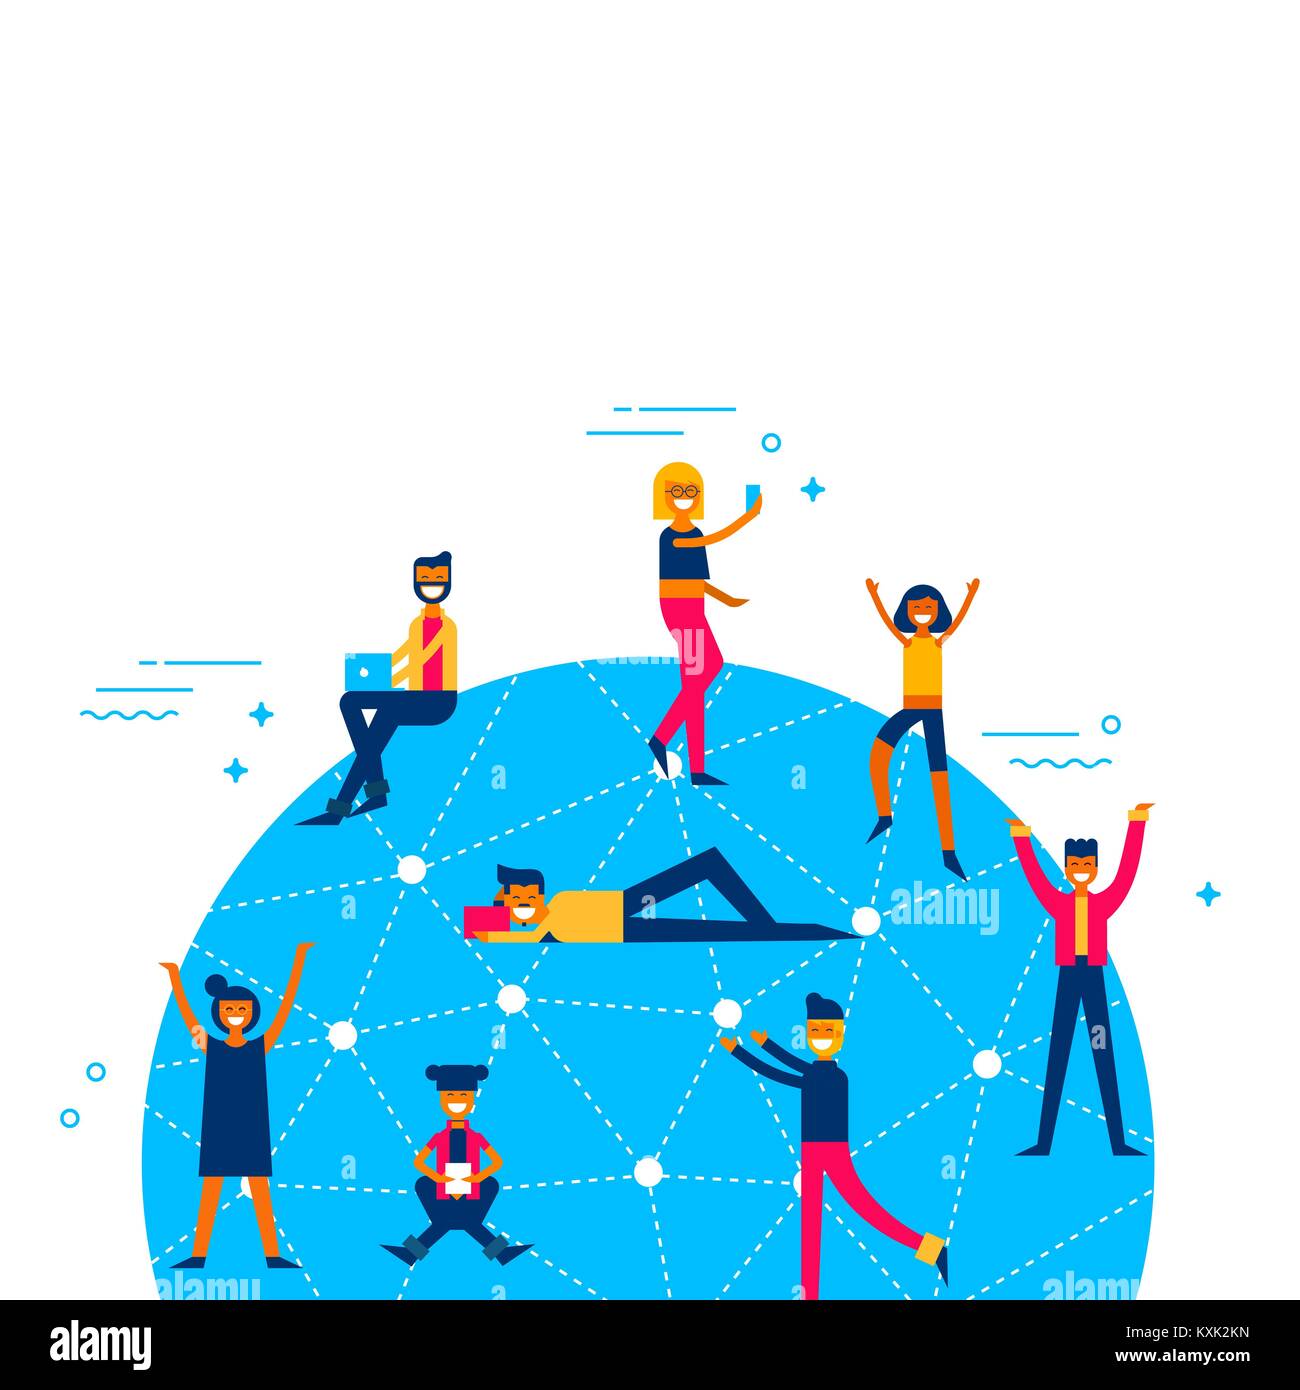 People connected to social media network around the world, worldwide internet access concept illustration in modern flat art style. EPS10 vector. Stock Vector